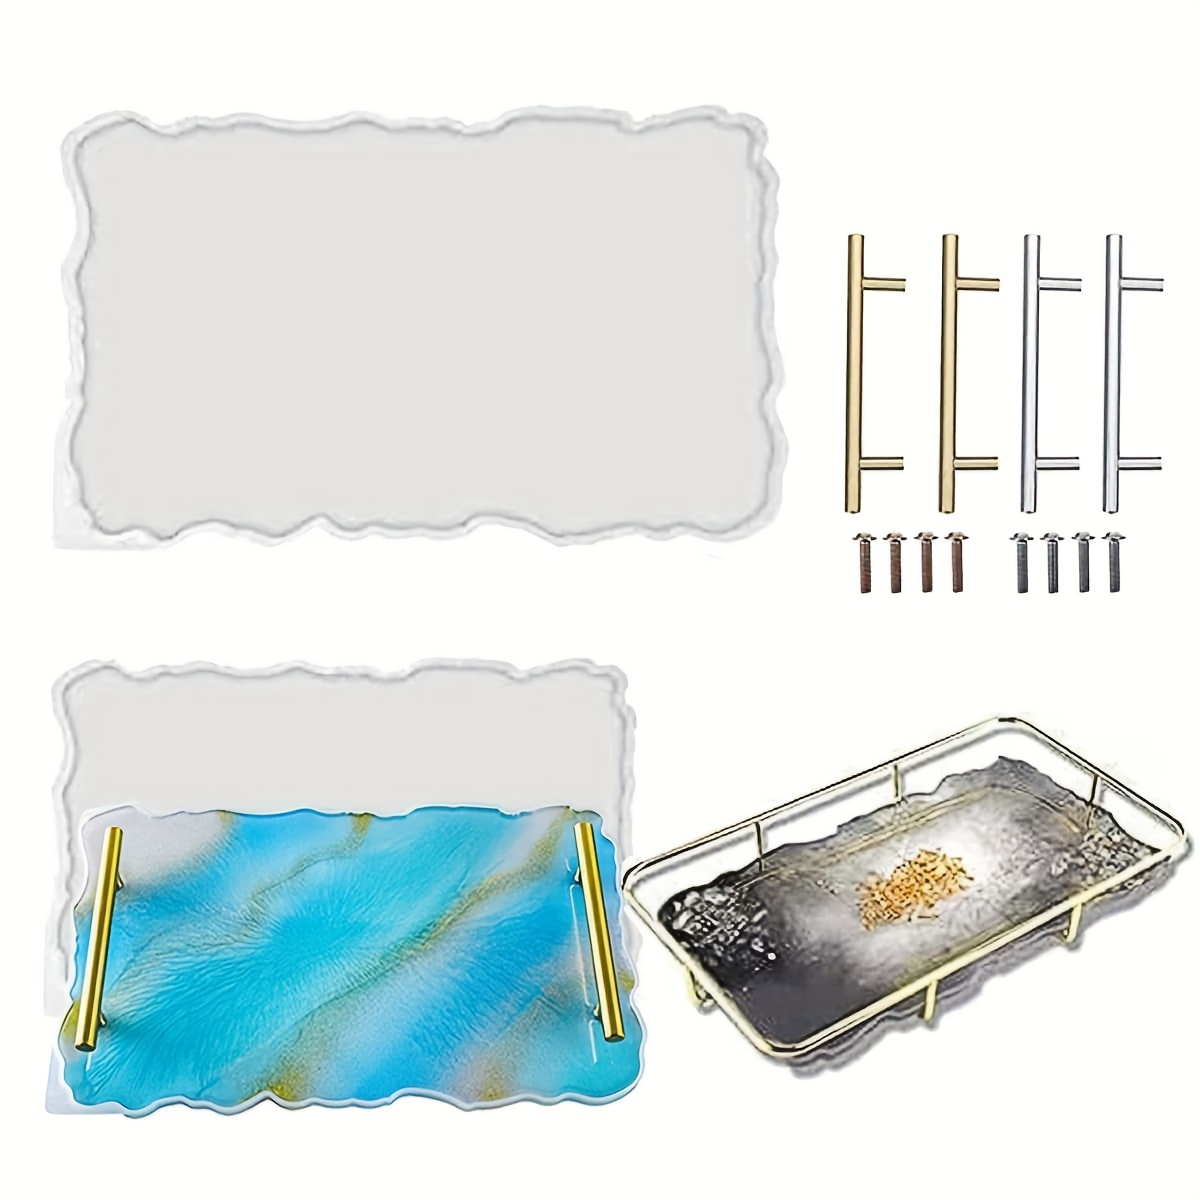 China 2 Pieces Tray Silicone Mold Kit Irregular Epoxy Resin Tray Molds for (Rectangle+Round), White